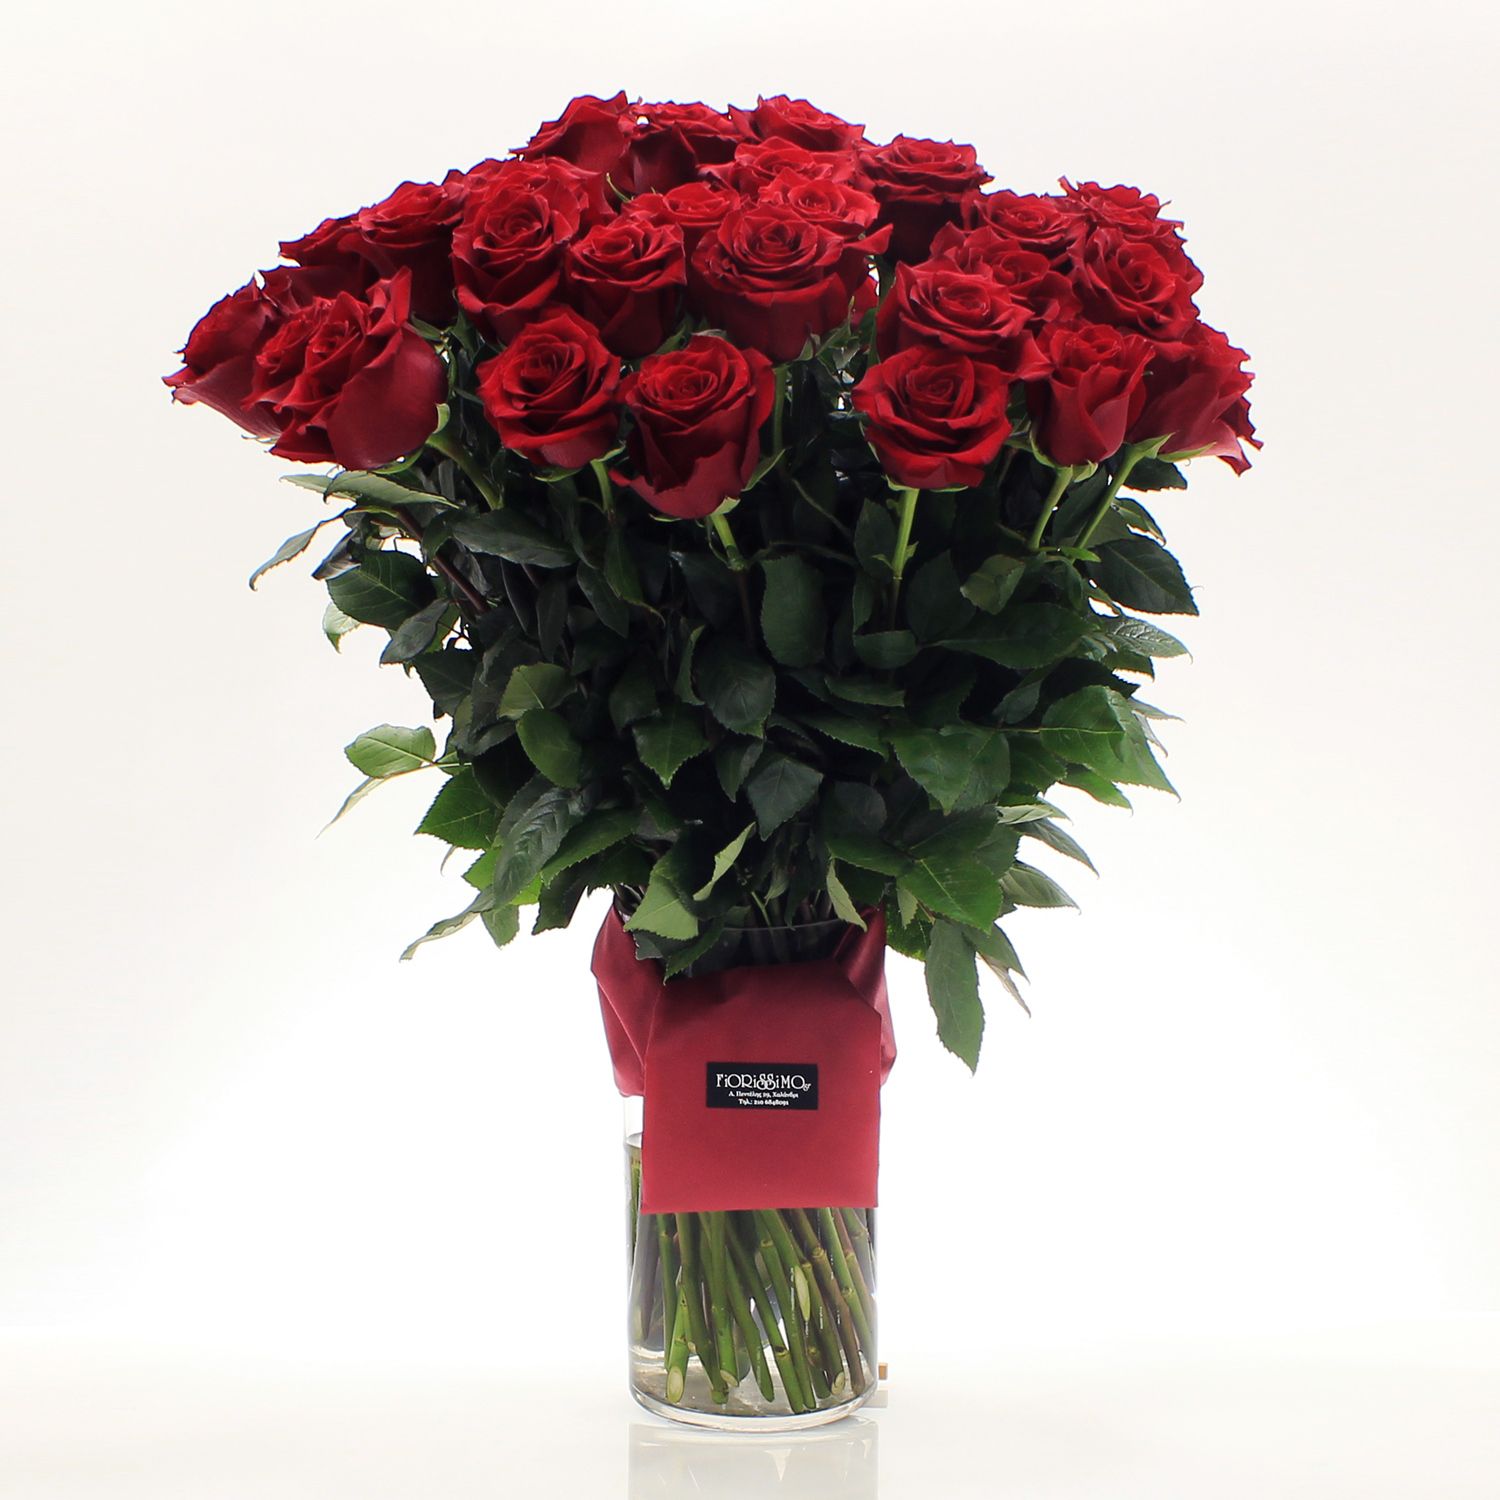 Vase with 51 roses!!